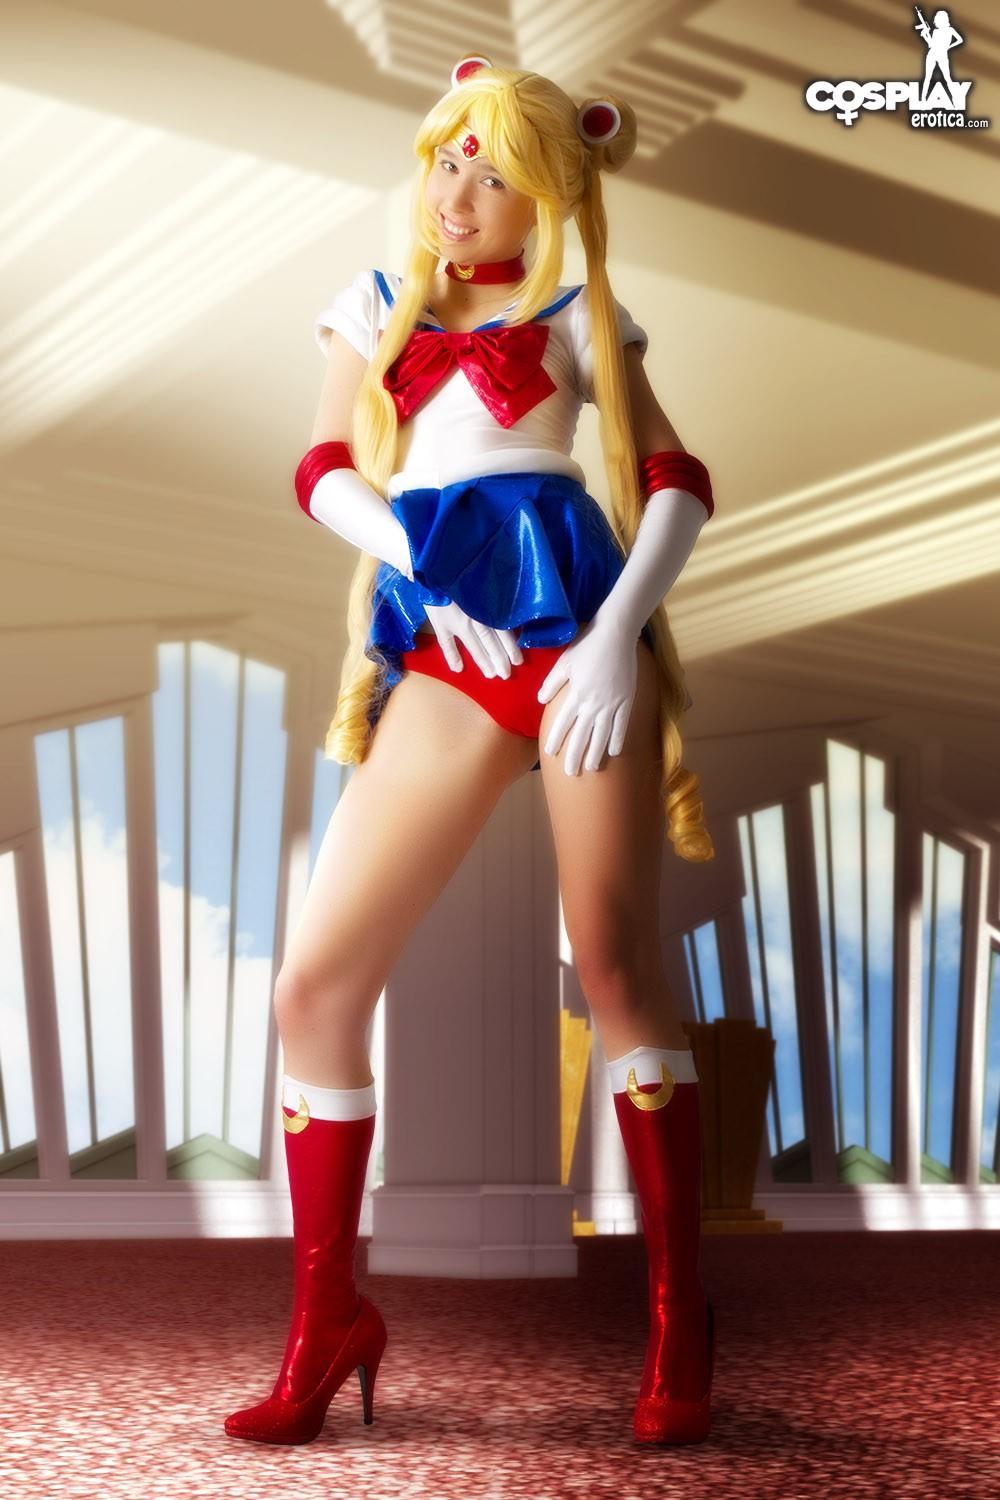 Cosplay girl Stacy is fighting evil by moonlight #60007711